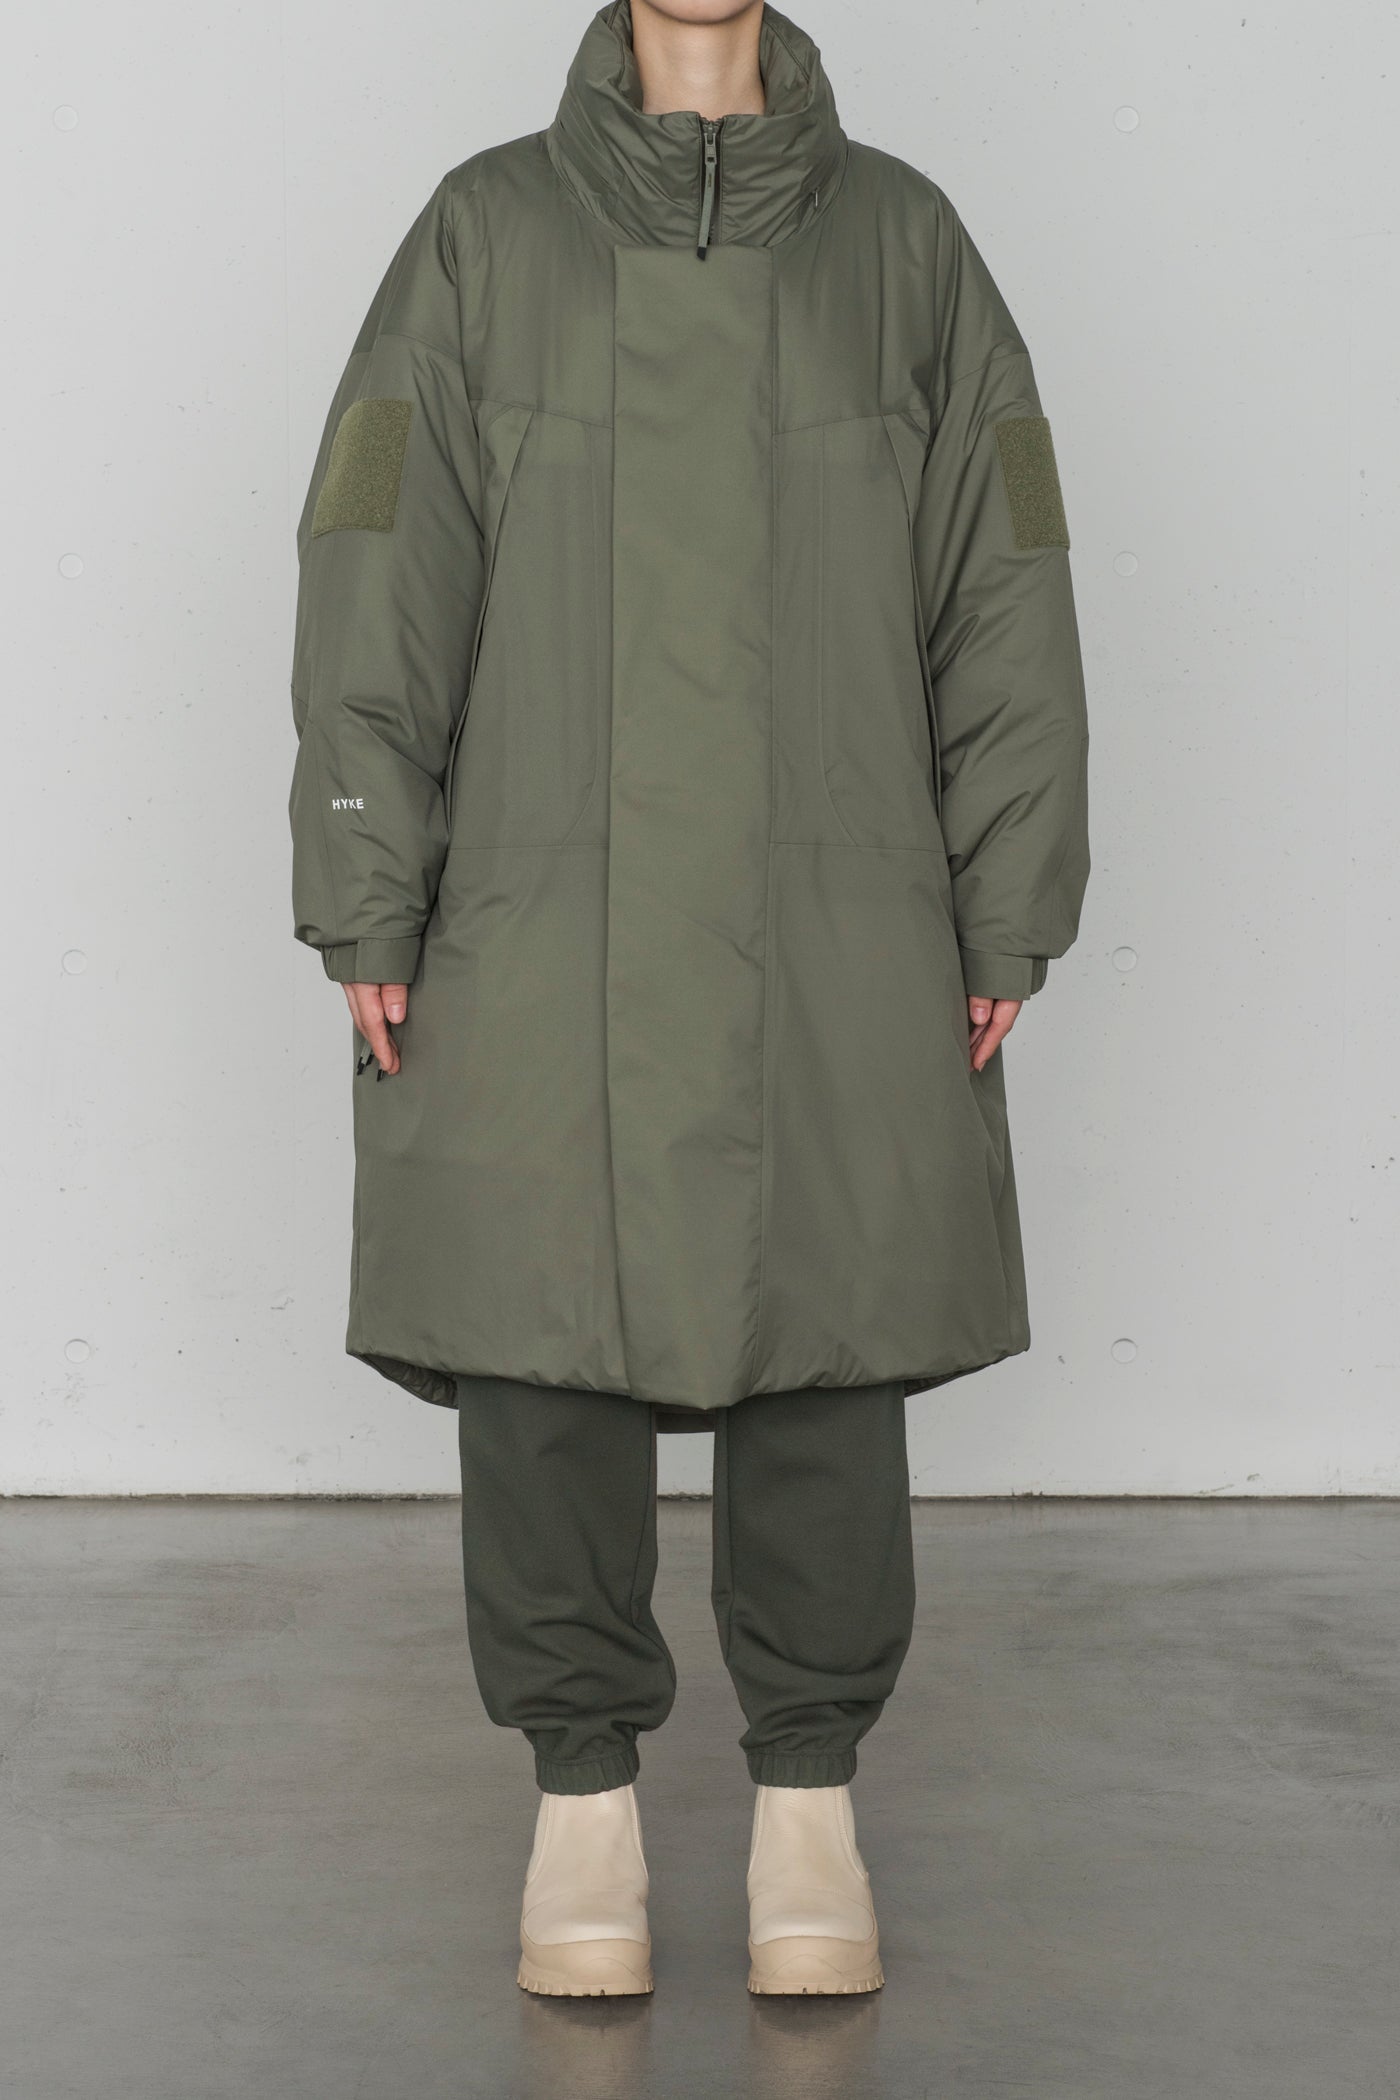 OUTER – HYKE ONLINE STORE